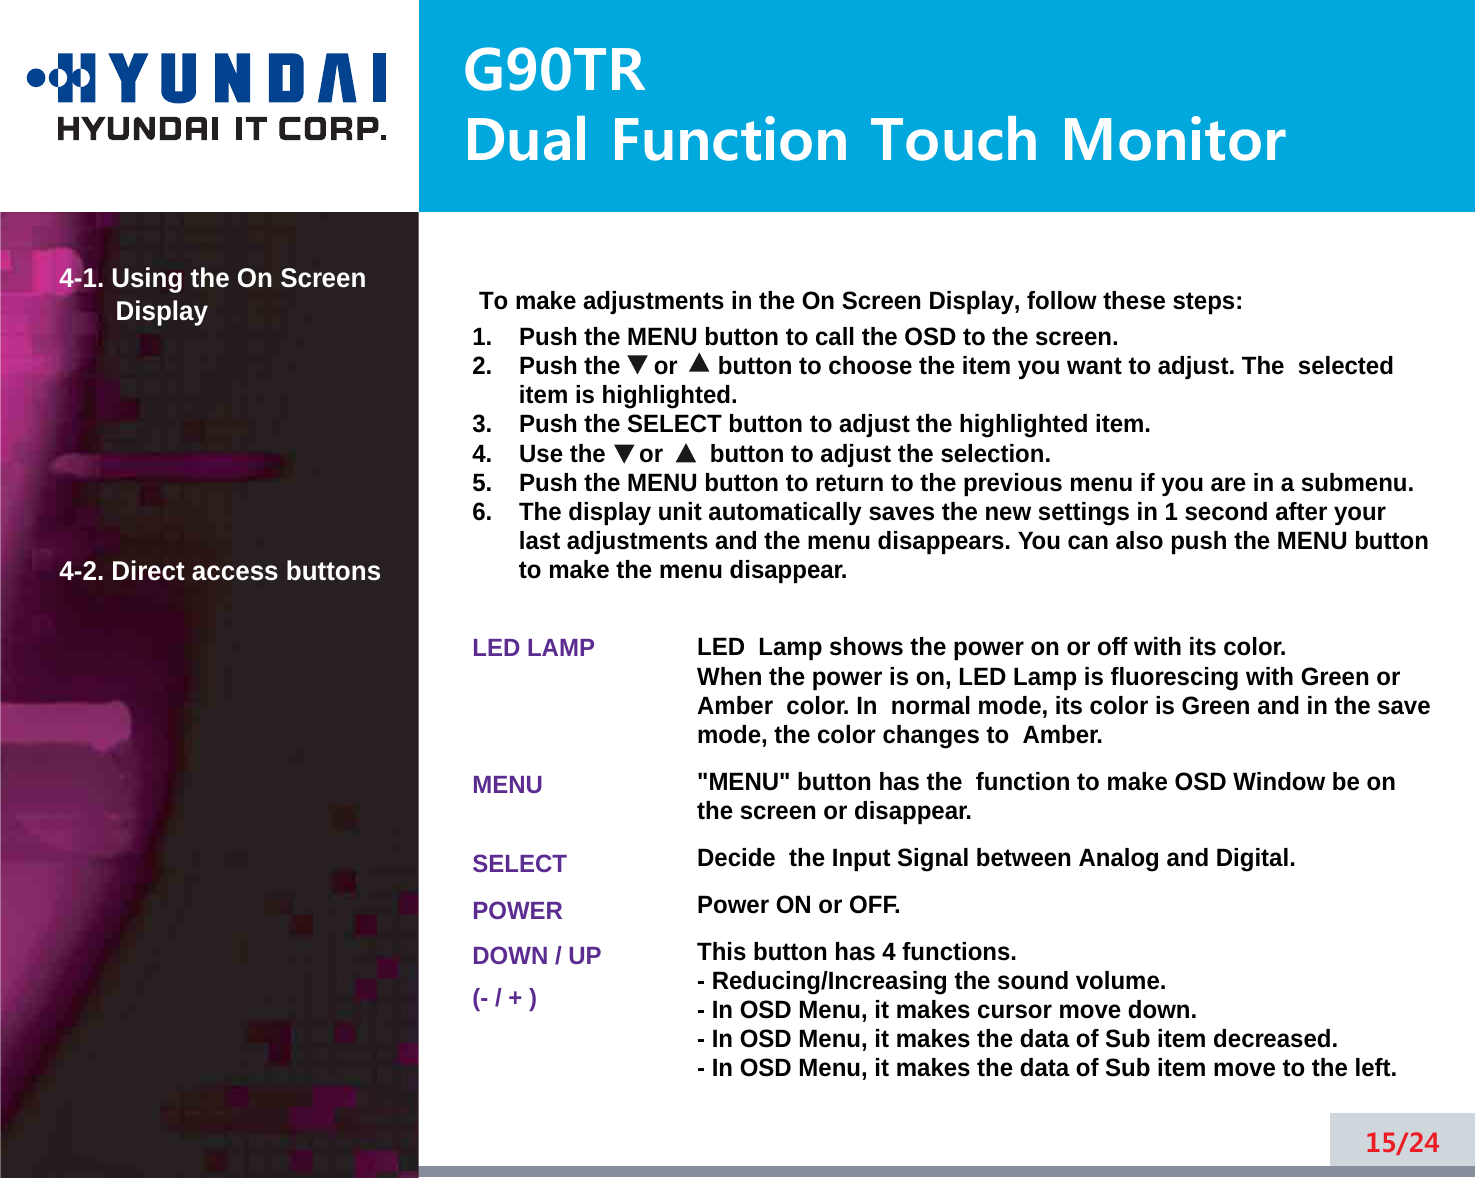 G90TRDual Function Touch Monitor4-1. Using the On ScreenDisplay 4-2. Direct access buttons15/24To make adjustments in the On Screen Display, follow these steps:1.    Push the MENU button to call the OSD to the screen. 2.    Push the     or      button to choose the item you want to adjust. The  selecteditem is highlighted.3.    Push the SELECT button to adjust the highlighted item. 4.    Use the     or       button to adjust the selection.5.    Push the MENU button to return to the previous menu if you are in a submenu.6.    The display unit automatically saves the new settings in 1 second after yourlast adjustments and the menu disappears. You can also push the MENU buttonto make the menu disappear.LED LAMPMENUSELECTPOWERDOWN / UP(- / + )LED  Lamp shows the power on or off with its color.When the power is on, LED Lamp is fluorescing with Green orAmber  color. In  normal mode, its color is Green and in the savemode, the color changes to  Amber.&quot;MENU&quot; button has the  function to make OSD Window be onthe screen or disappear.Decide  the Input Signal between Analog and Digital.Power ON or OFF.This button has 4 functions.- Reducing/Increasing the sound volume.- In OSD Menu, it makes cursor move down.- In OSD Menu, it makes the data of Sub item decreased.- In OSD Menu, it makes the data of Sub item move to the left.